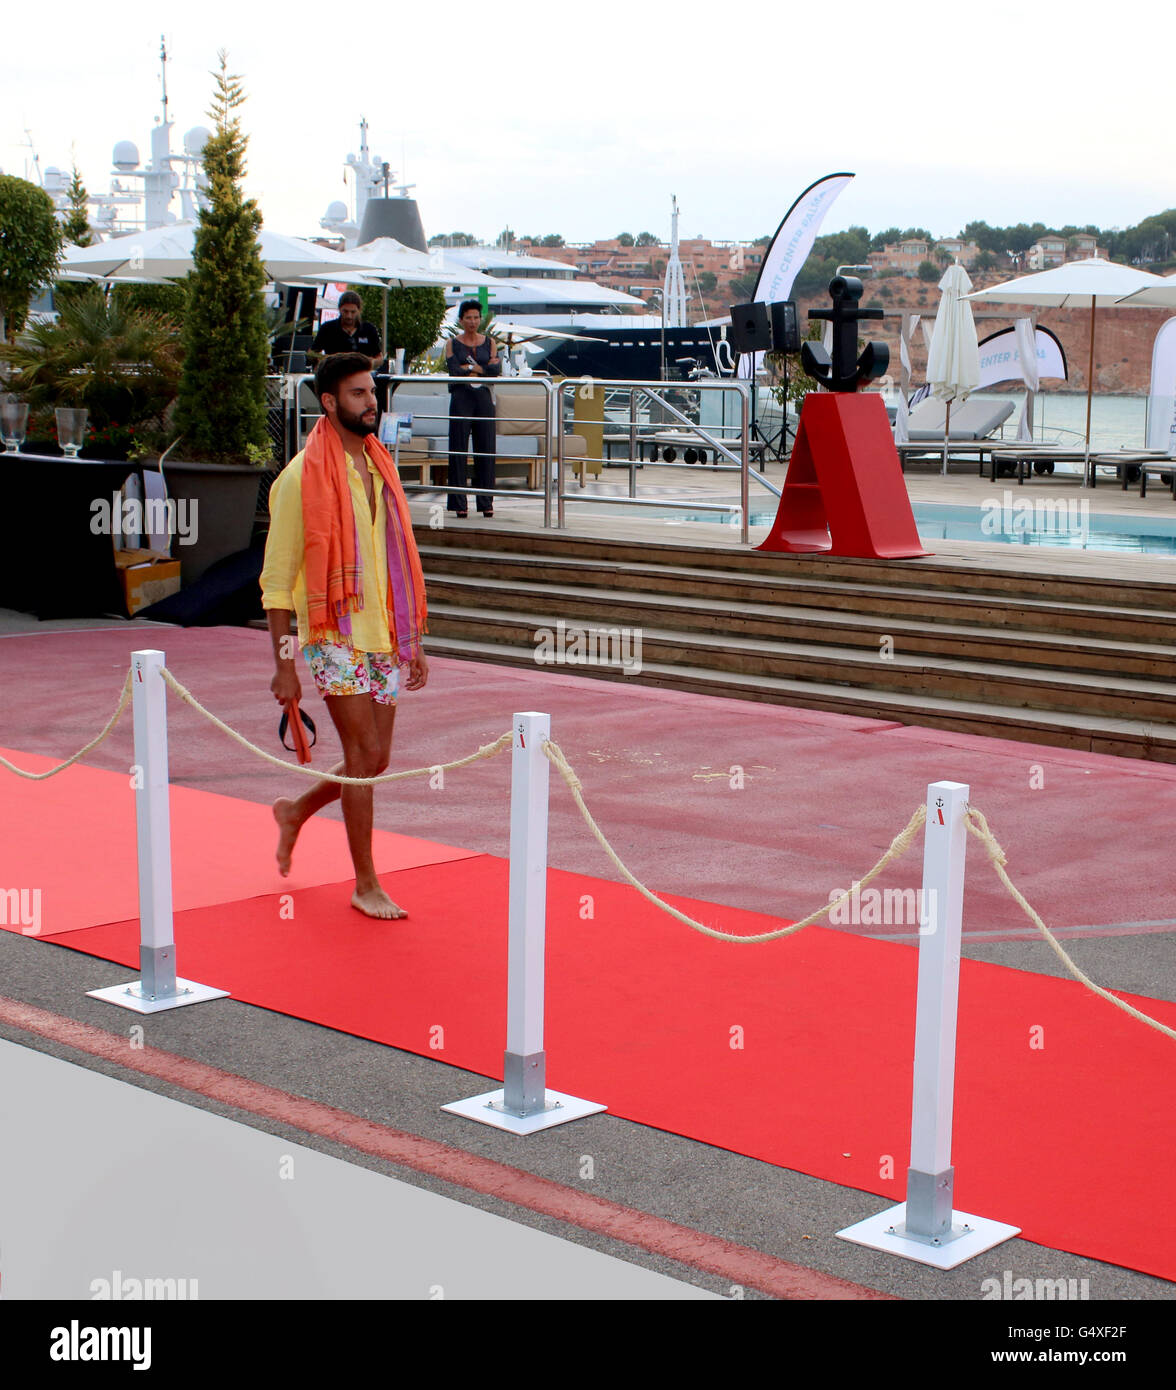 End event fashion parade - Best of Yachting - Port Adriano - 10th, 11th, 12th June 2016 - Philippe Starck designed Port Adriano Stock Photo